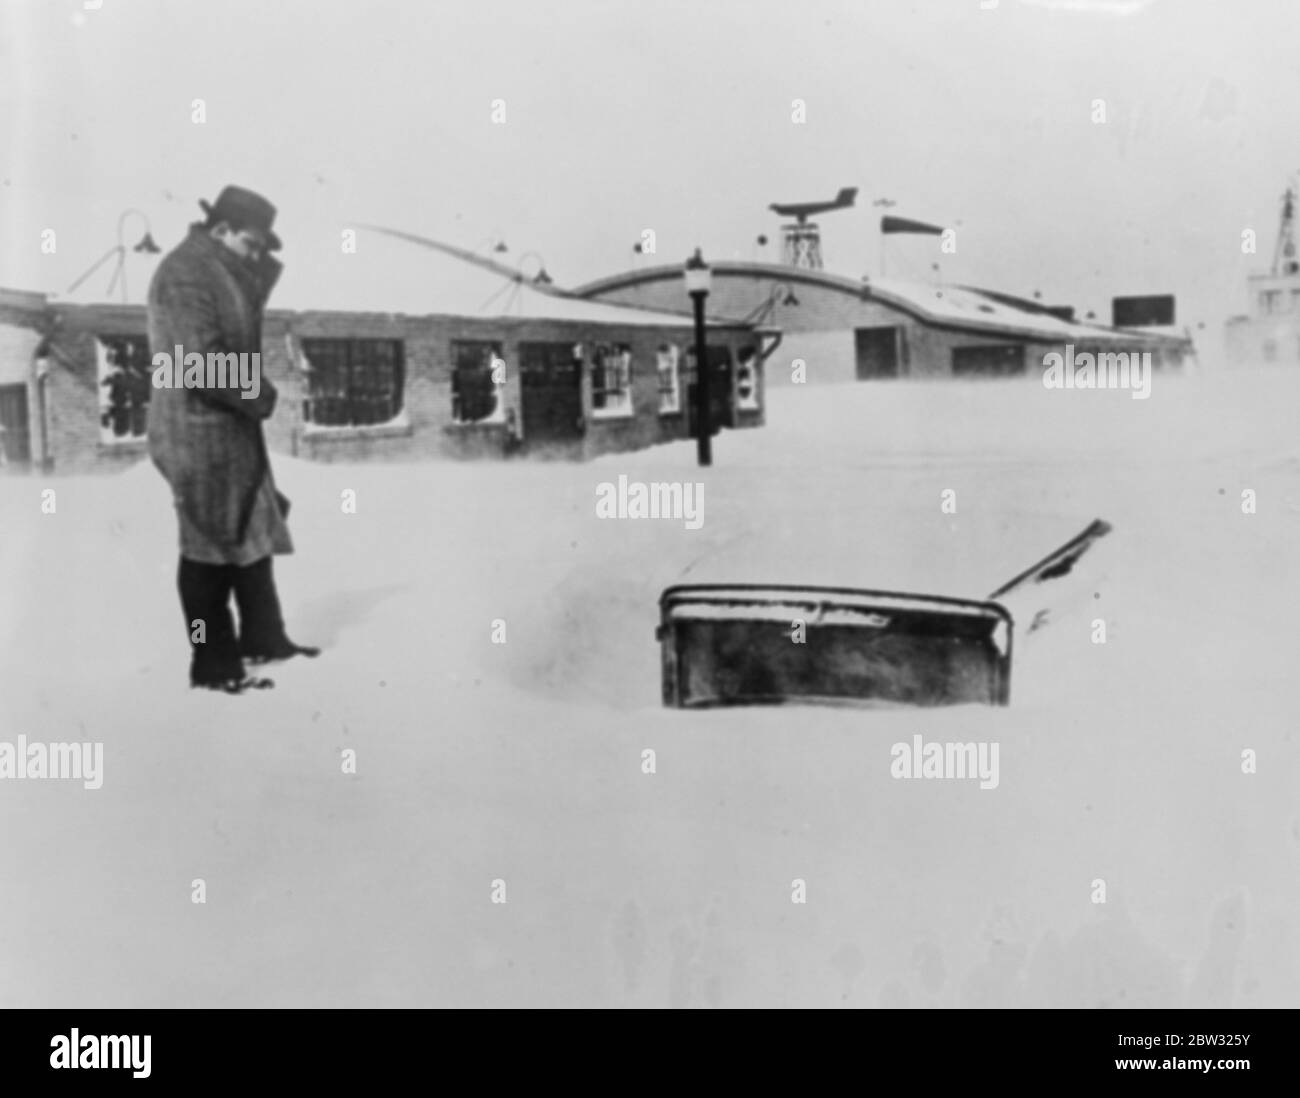 Buildings buried in grat snowstorm in America . Whole buildings at Buffalo , New York , were almost buried beneath snow drifts in a great snow storm which paralysed the city . Cars were buried beneath . A car buried in the snow which in some places was more than twelve feet deep . 18 March 1932 Stock Photo